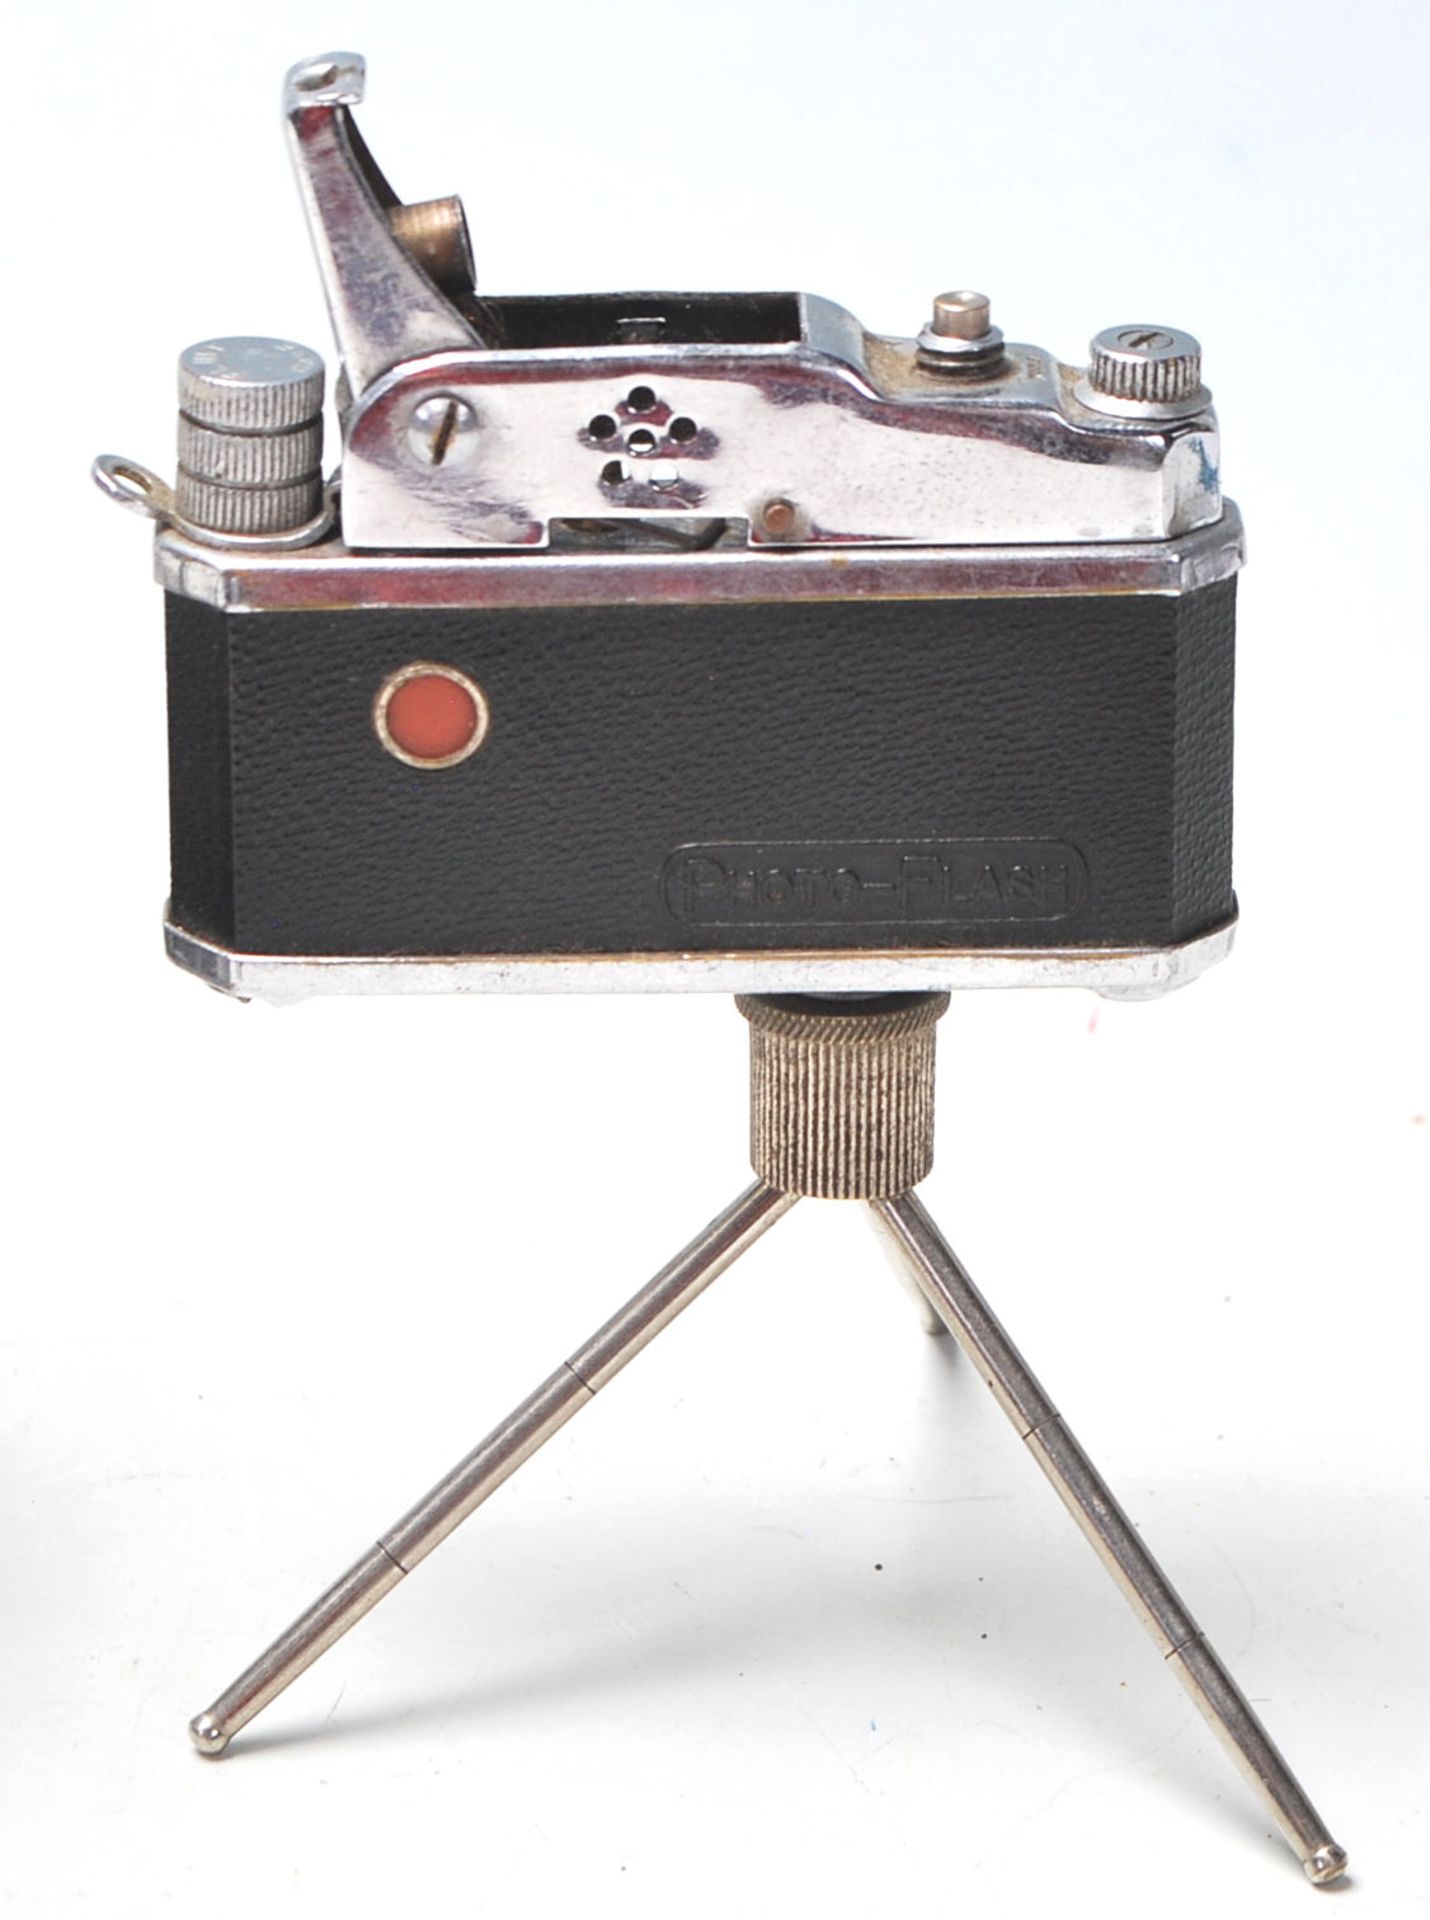 A vintage retro cigarette Photo-Flash lighter in the form of a film camera with spring loaded - Bild 3 aus 5